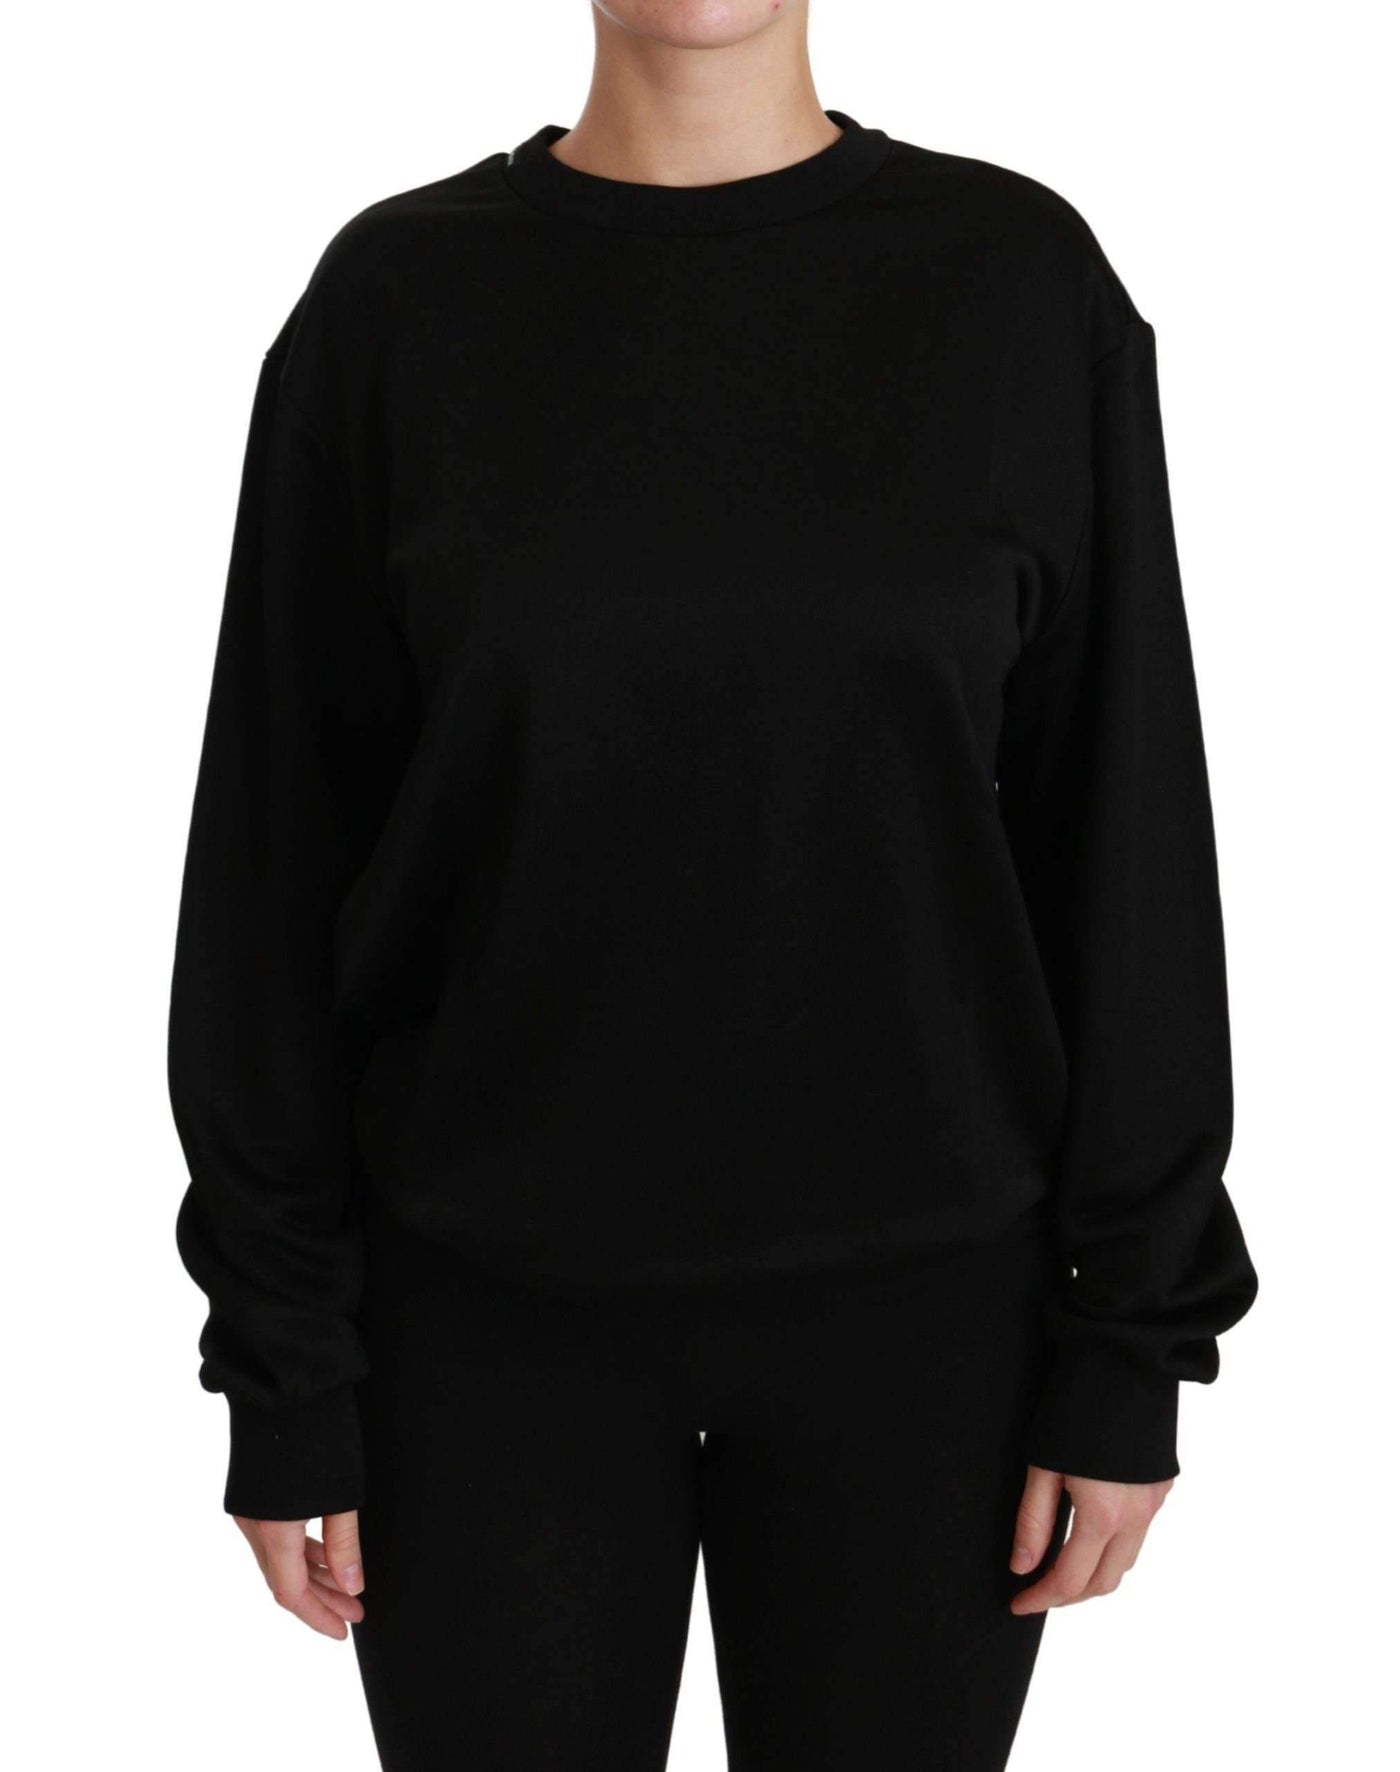 Dolce & Gabbana  Black Cotton Crewneck Pullover Sweater #women, Black, Brand_Dolce & Gabbana, Catch, Dolce & Gabbana, feed-agegroup-adult, feed-color-black, feed-gender-female, feed-size-IT36 | XS, feed-size-IT38|XS, feed-size-IT40|S, feed-size-IT42|M, Gender_Women, IT38|XS, IT40|S, IT42|M, Kogan, Sweaters - Women - Clothing, Women - New Arrivals at SEYMAYKA